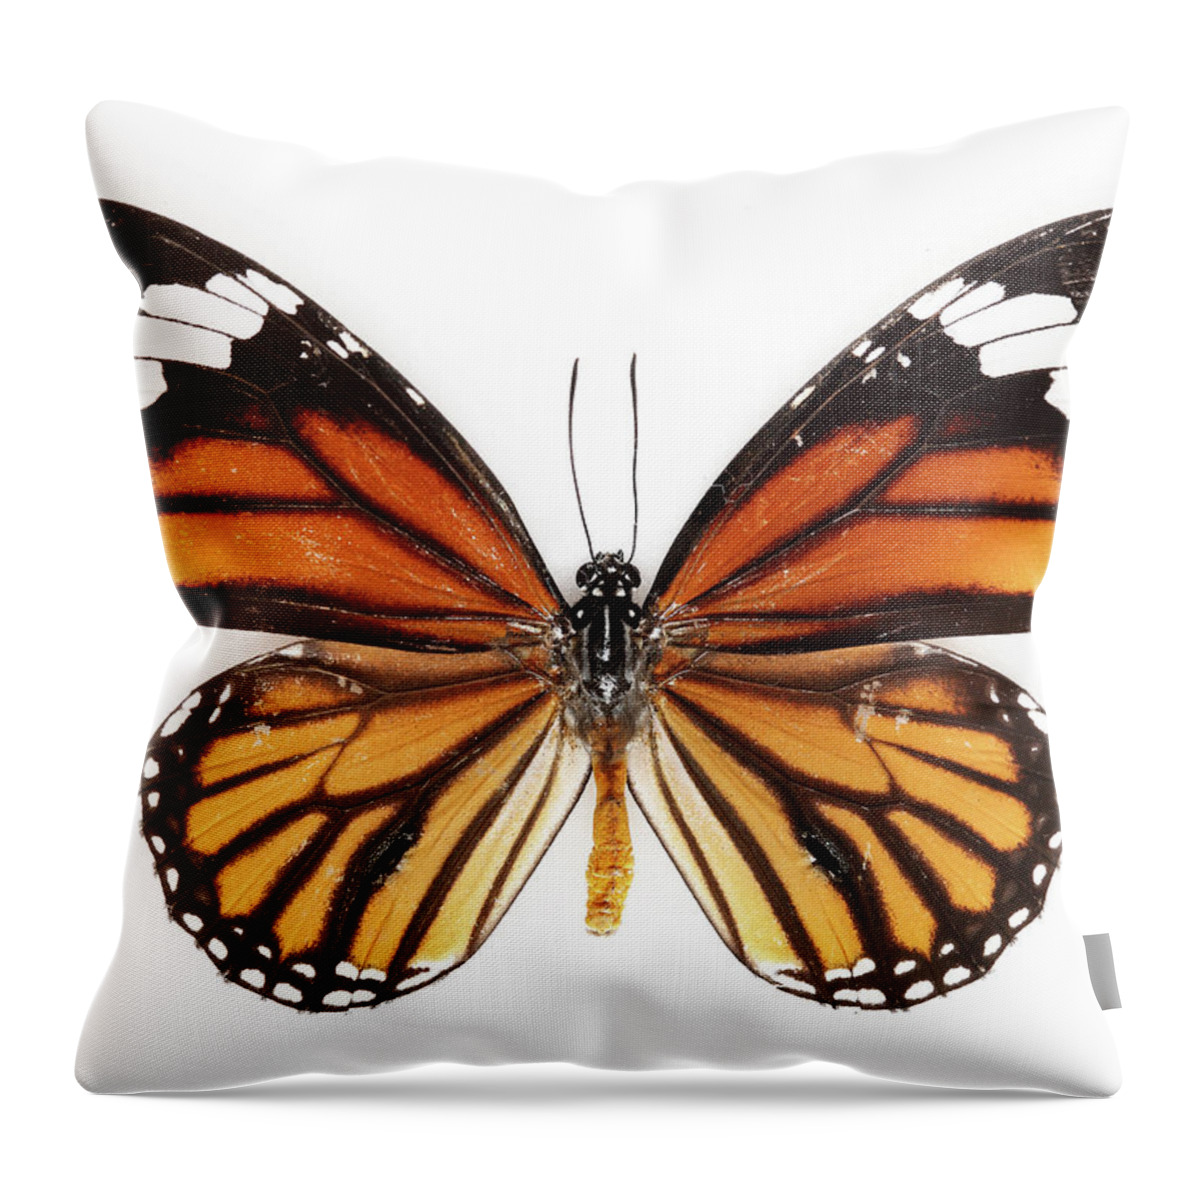 White Background Throw Pillow featuring the photograph Common Tiger Butterfly by Thepalmer